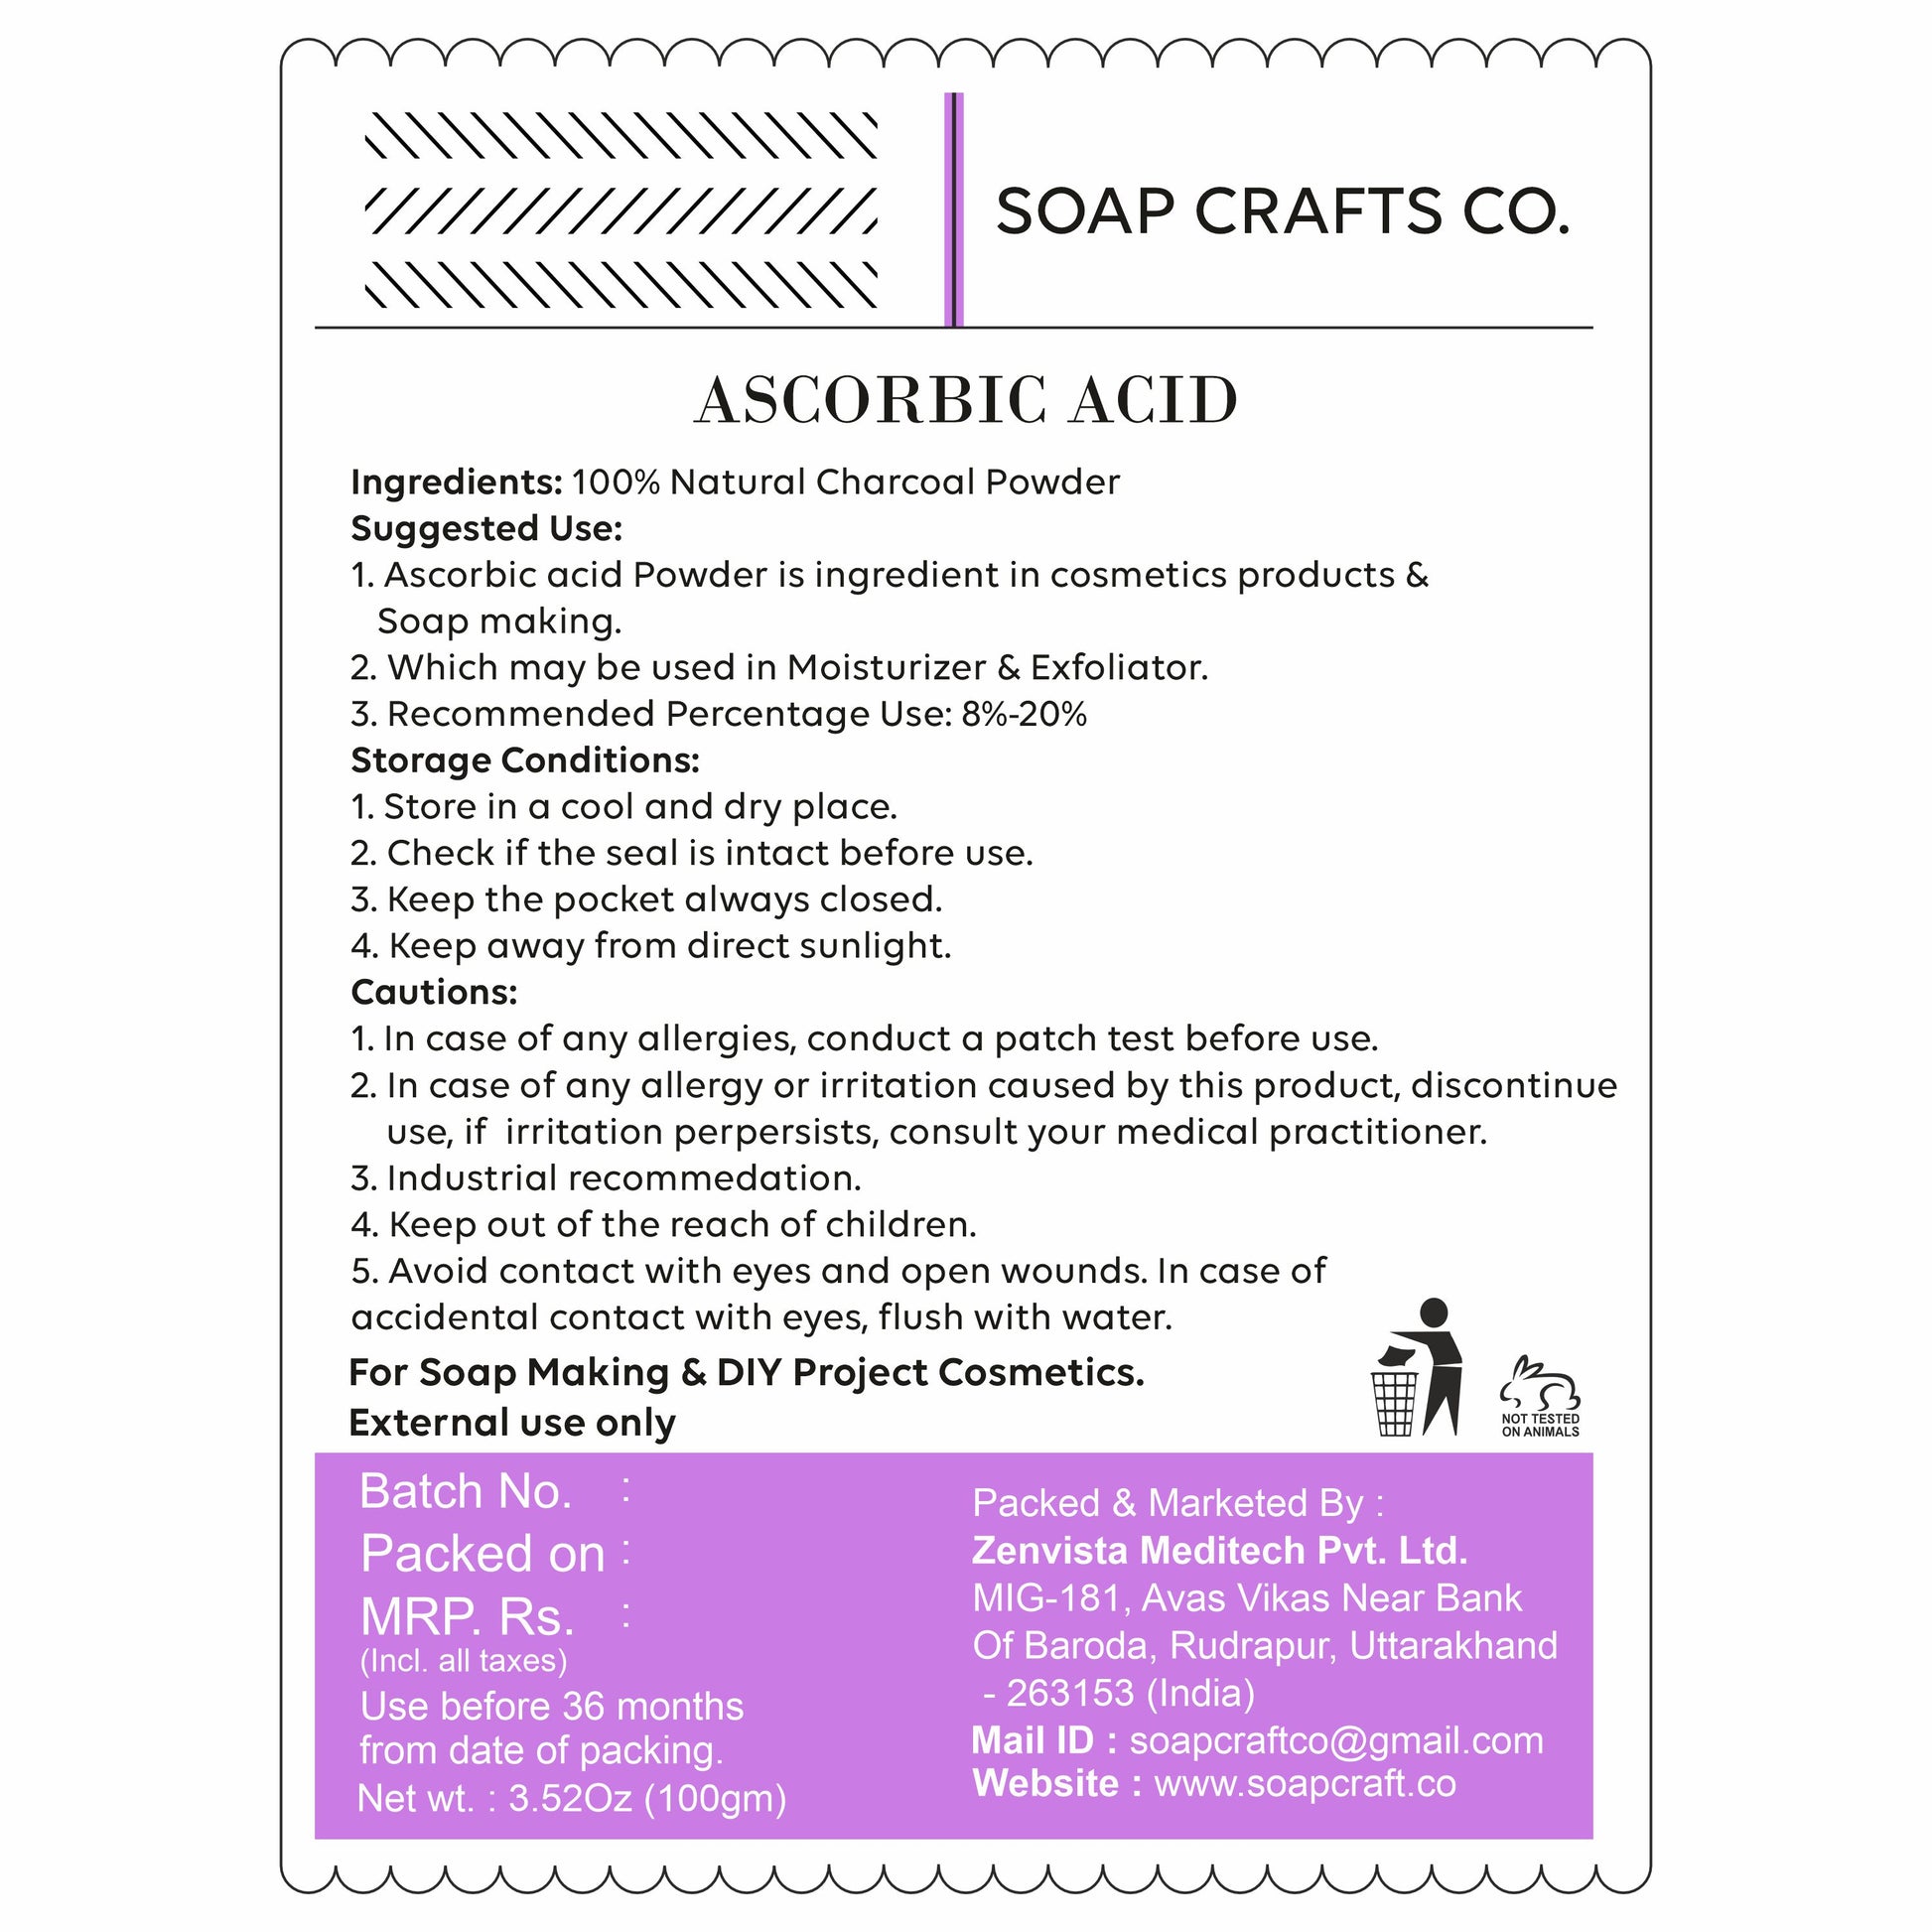 cosmeticmaking, saopmaking, cosmeticmakingingredients, soapmakingingredients,cosmeticingredients,naturalingredients,organicingredients,veganingredients, essentialoils,fragranceoils,carrieroils, carrieroils, butters, clays,botanicals,herbs,preservatives,emulsifiers,surfa ctants,thickeners, thickeners,exfoliants, Ascorbic acid